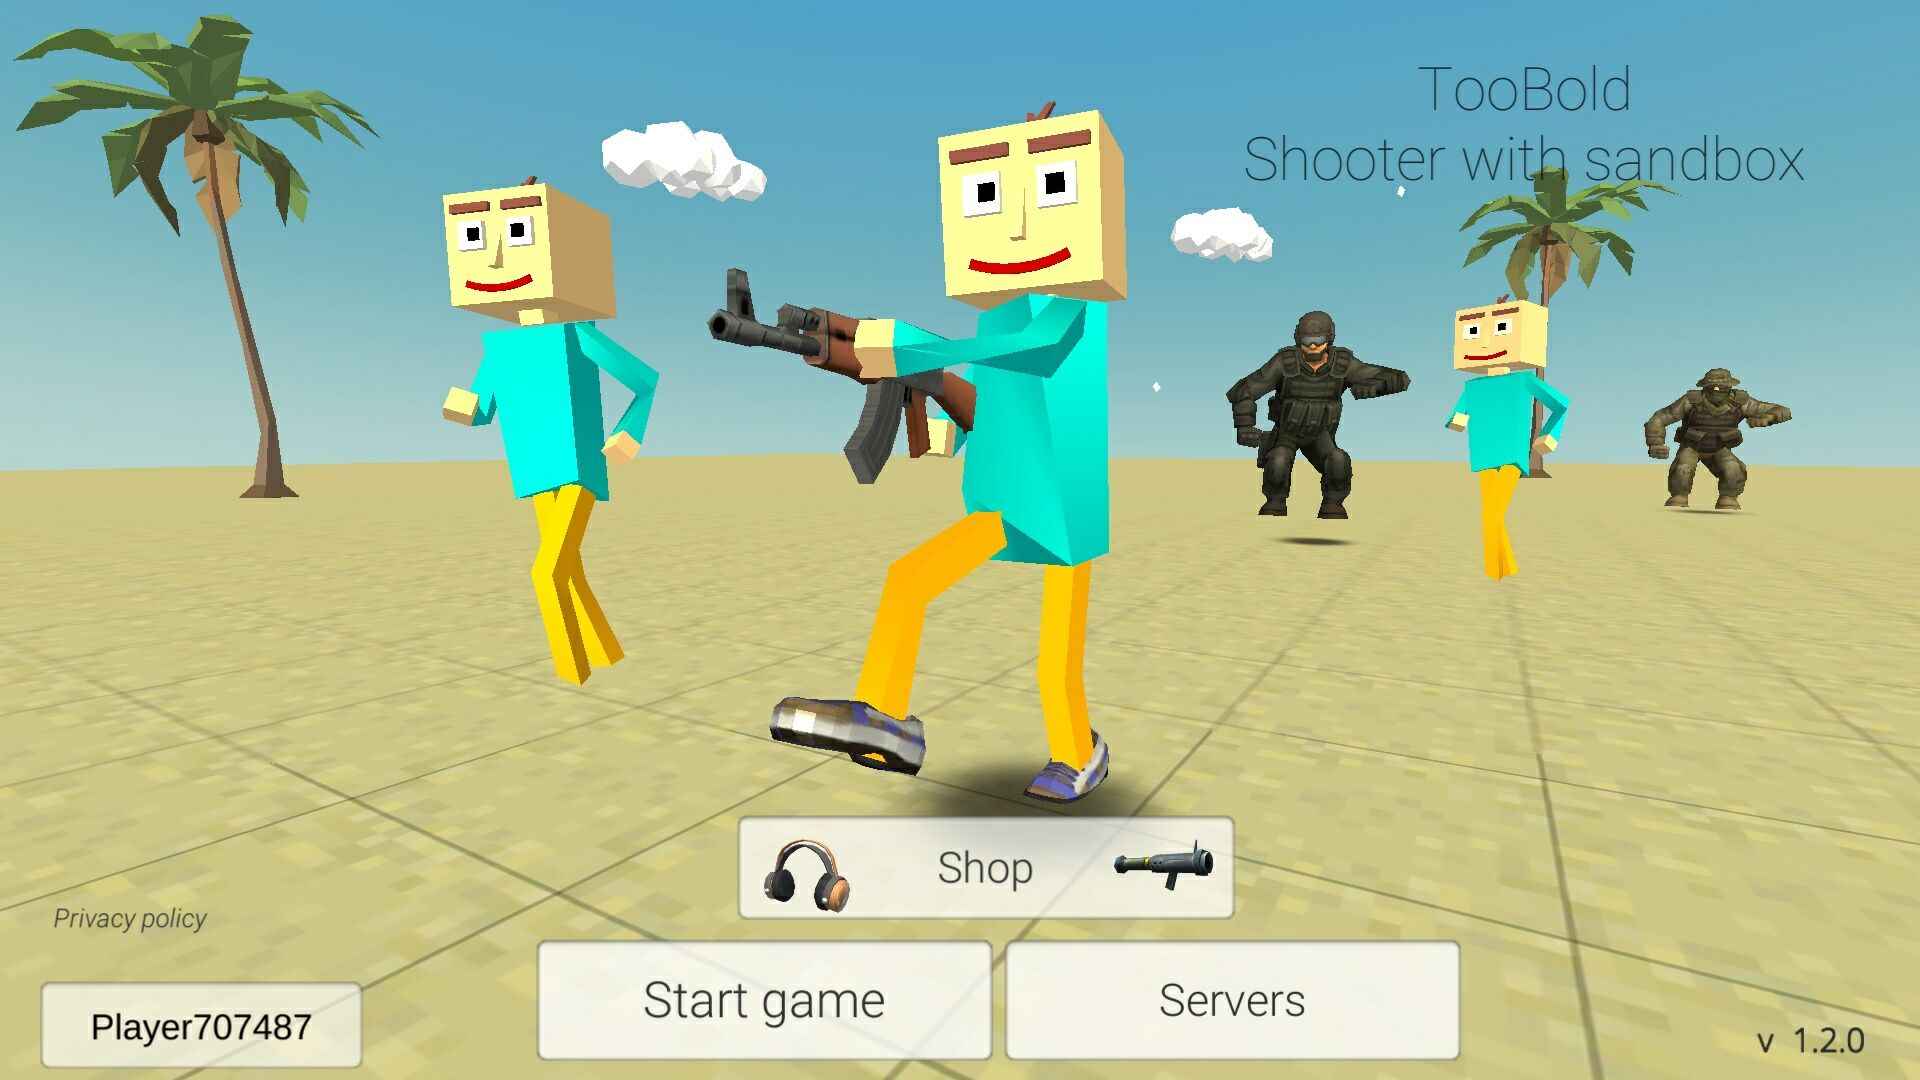 Multiplayer Shooter Toobold(沙盒射击)